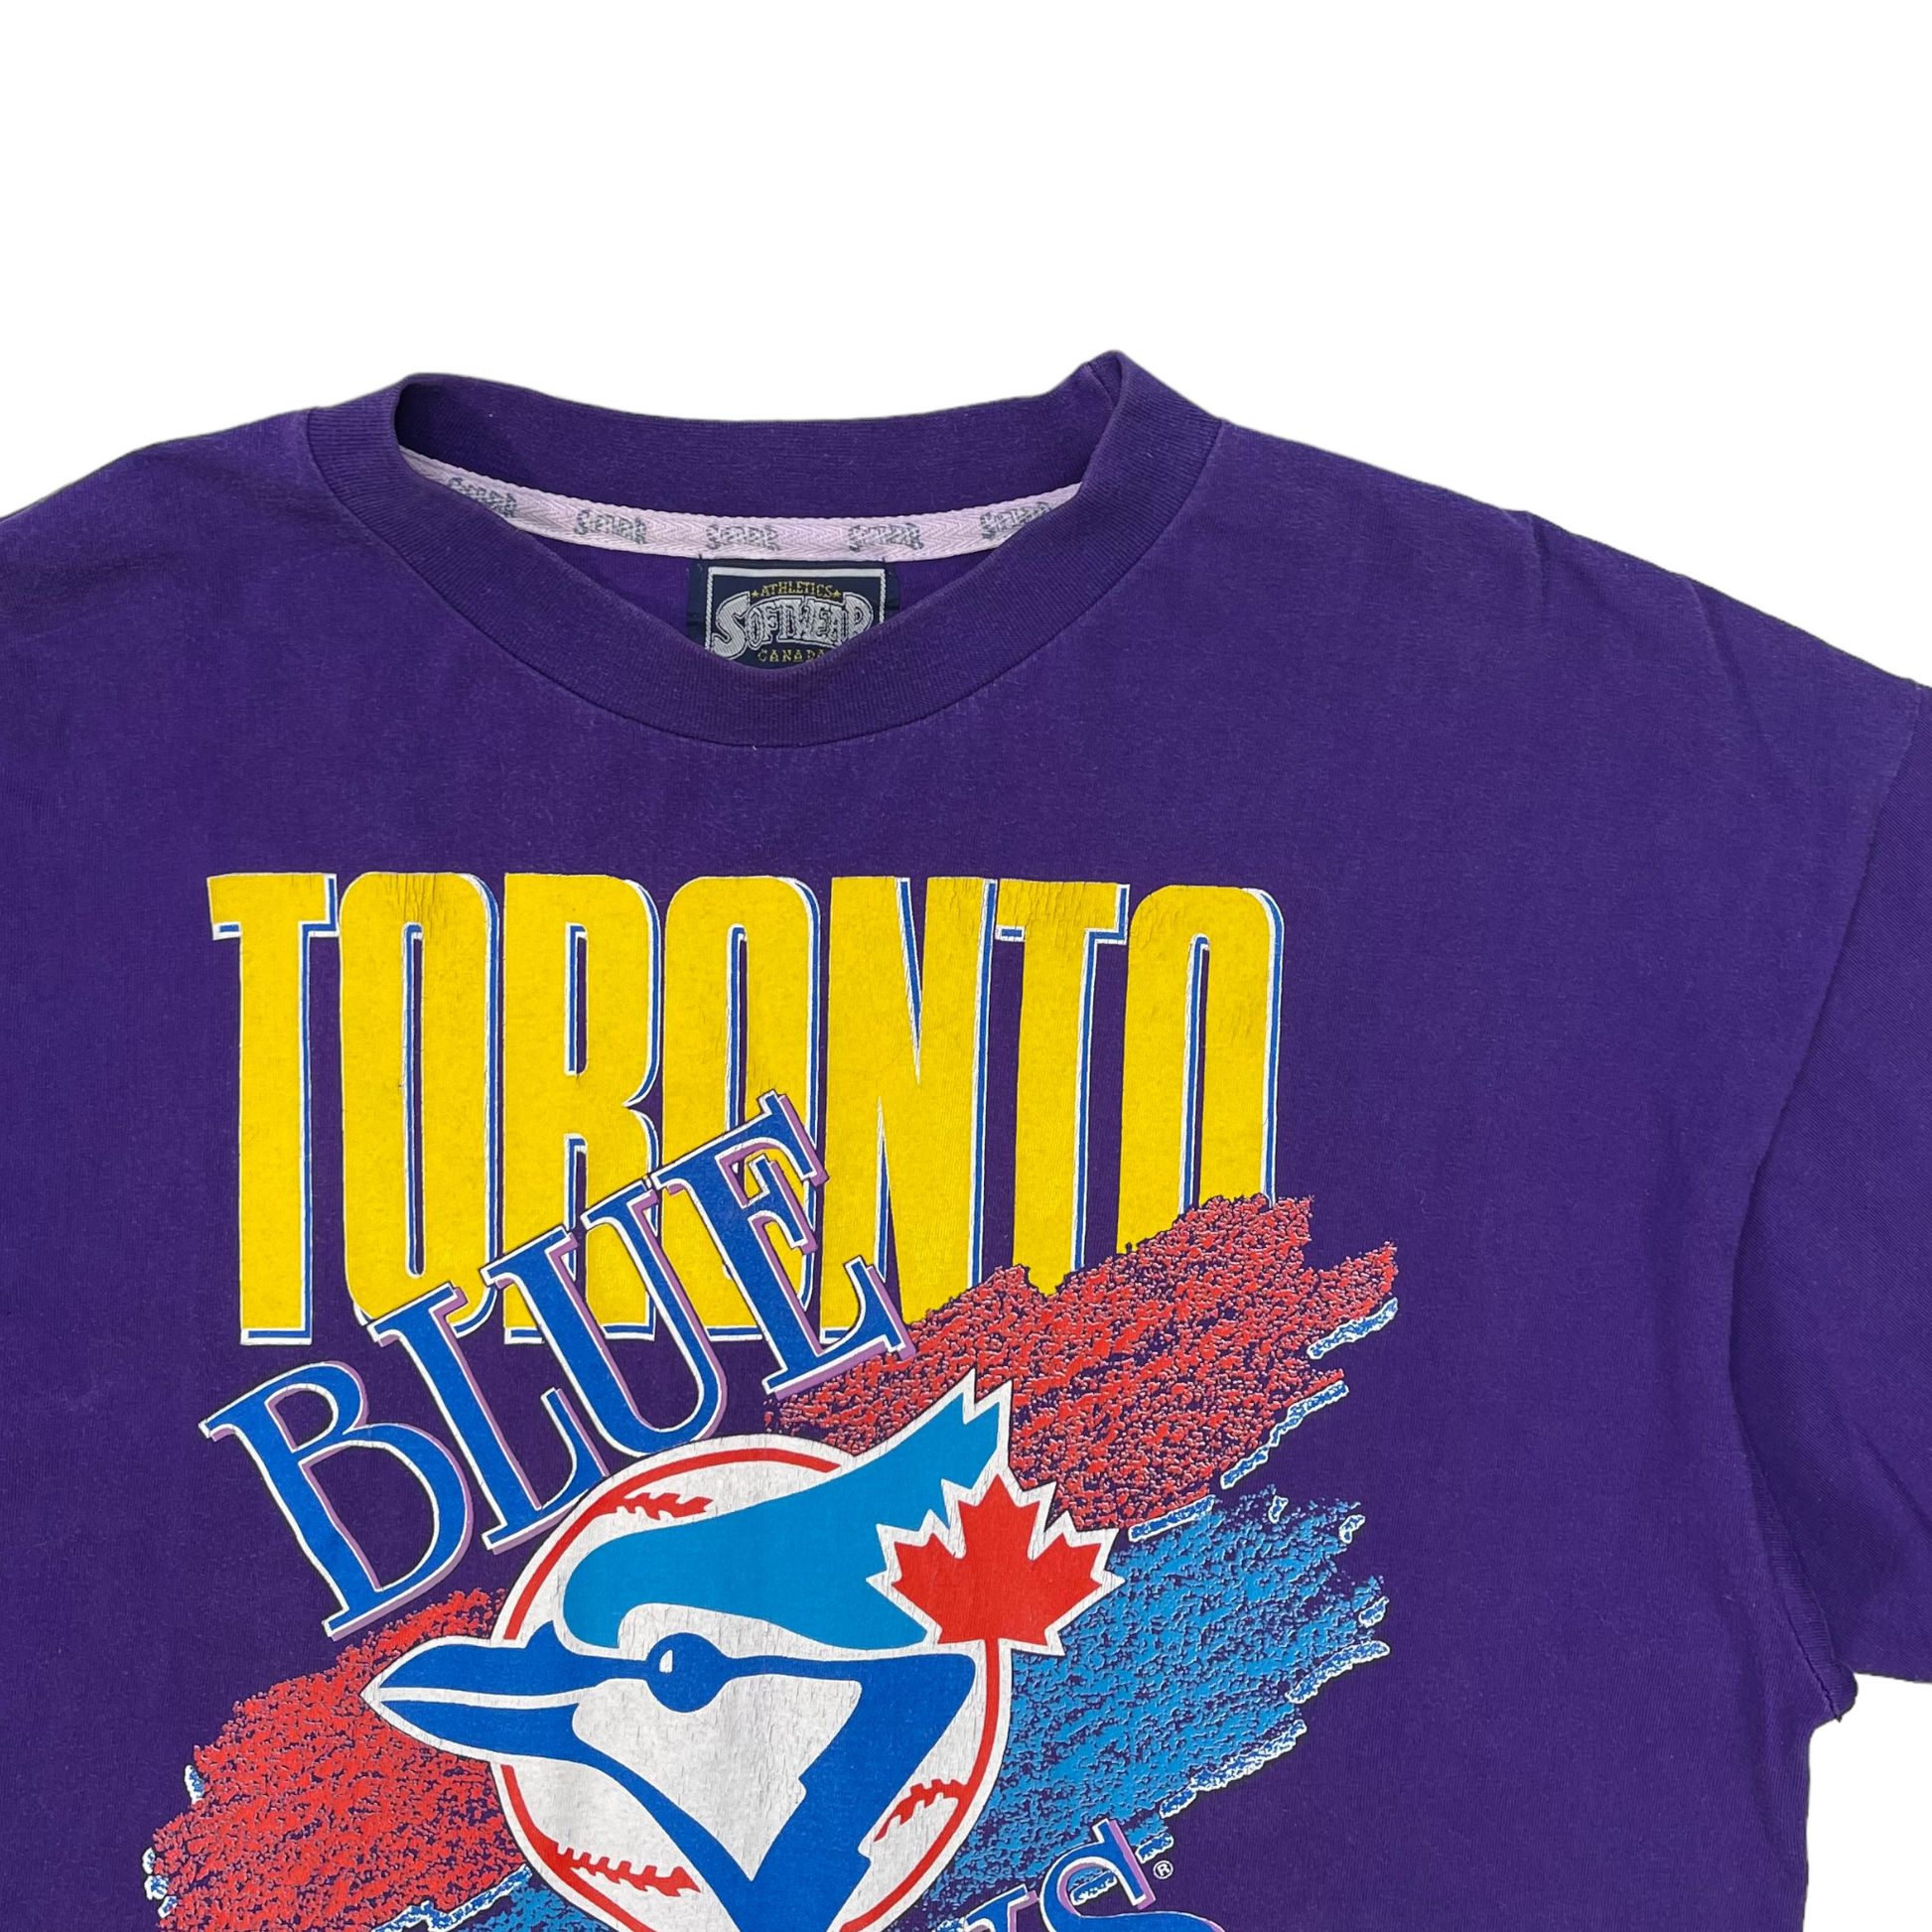 Vintage Toronto Blue Jays Tee size L (22x27.5) for $50 available